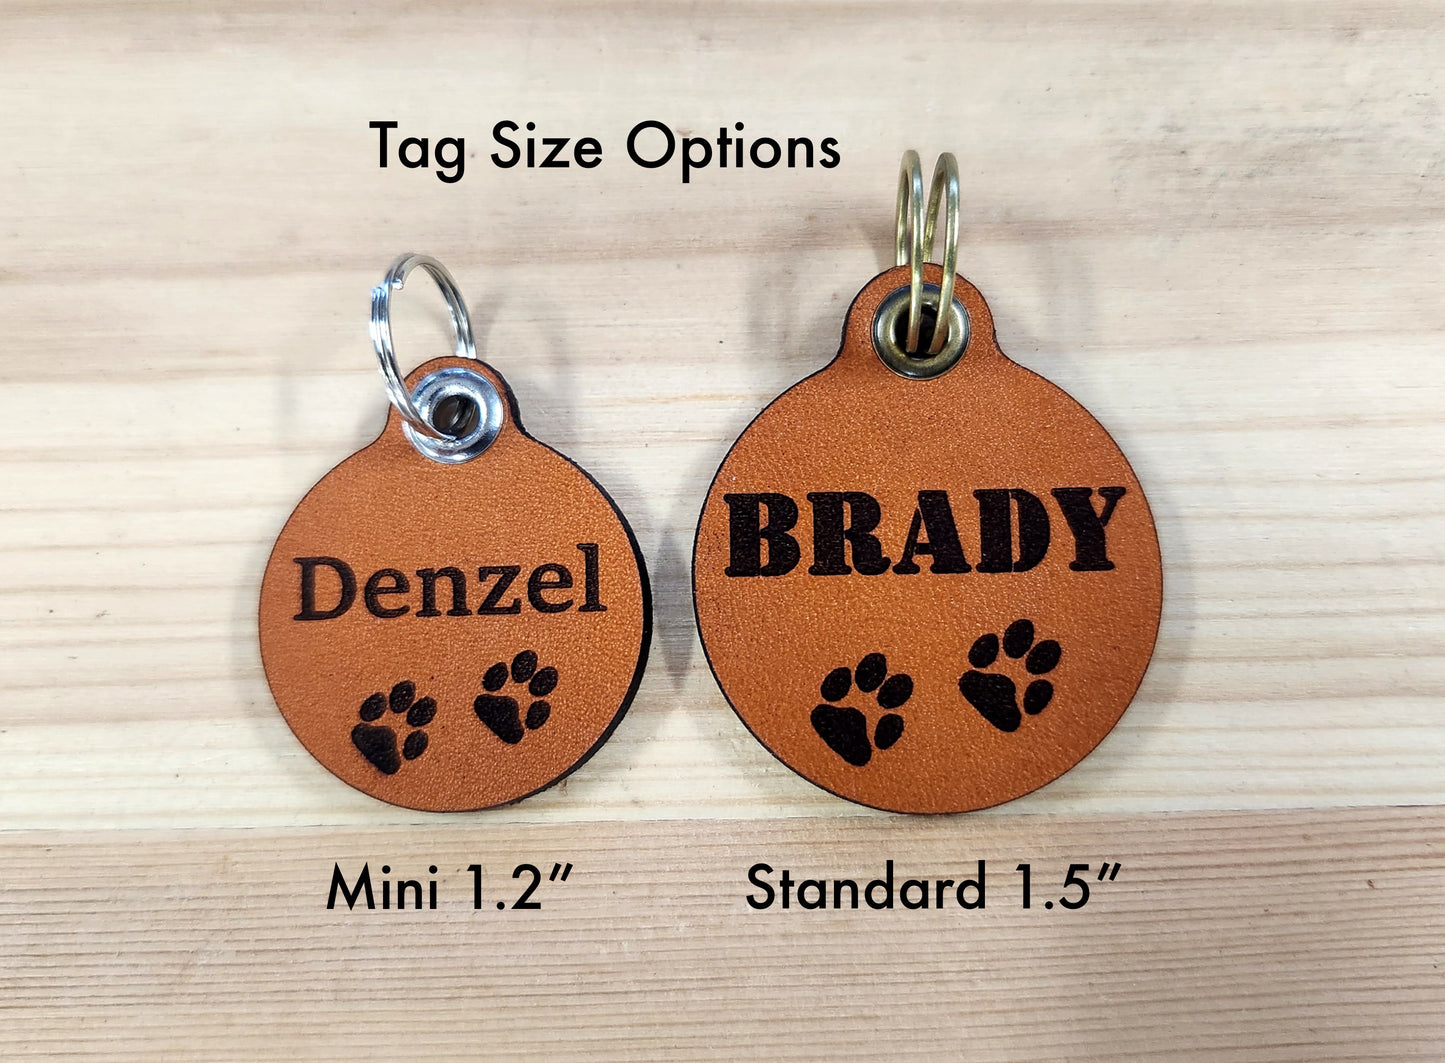 Quiet Leather Dog Id Tag - I've lost my Humans